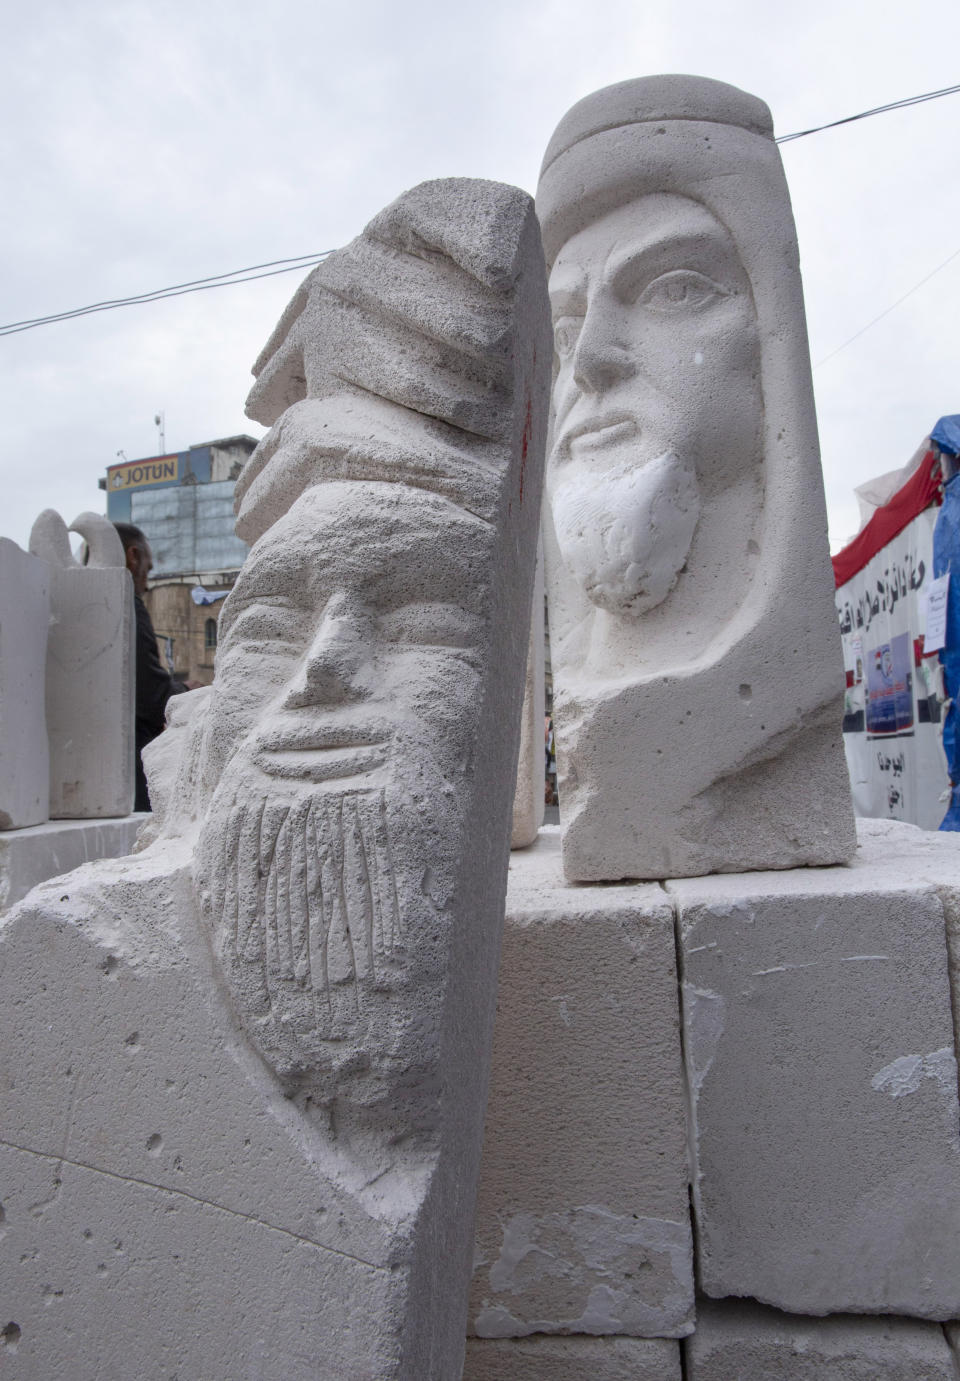 In this Monday, Dec. 16, 2019, photo, incomplete sculptures wait for the last touches before being stored in preparation for an upcoming art exhibition, during the ongoing protests in Tahrir square, Baghdad, Iraq. Tahrir Square has emerged as a focus of the protests, with protesters camped out in dozens of tents. Dozens of people took part in the simple opening of the sculpture exhibition. (AP Photo/Nasser Nasser)